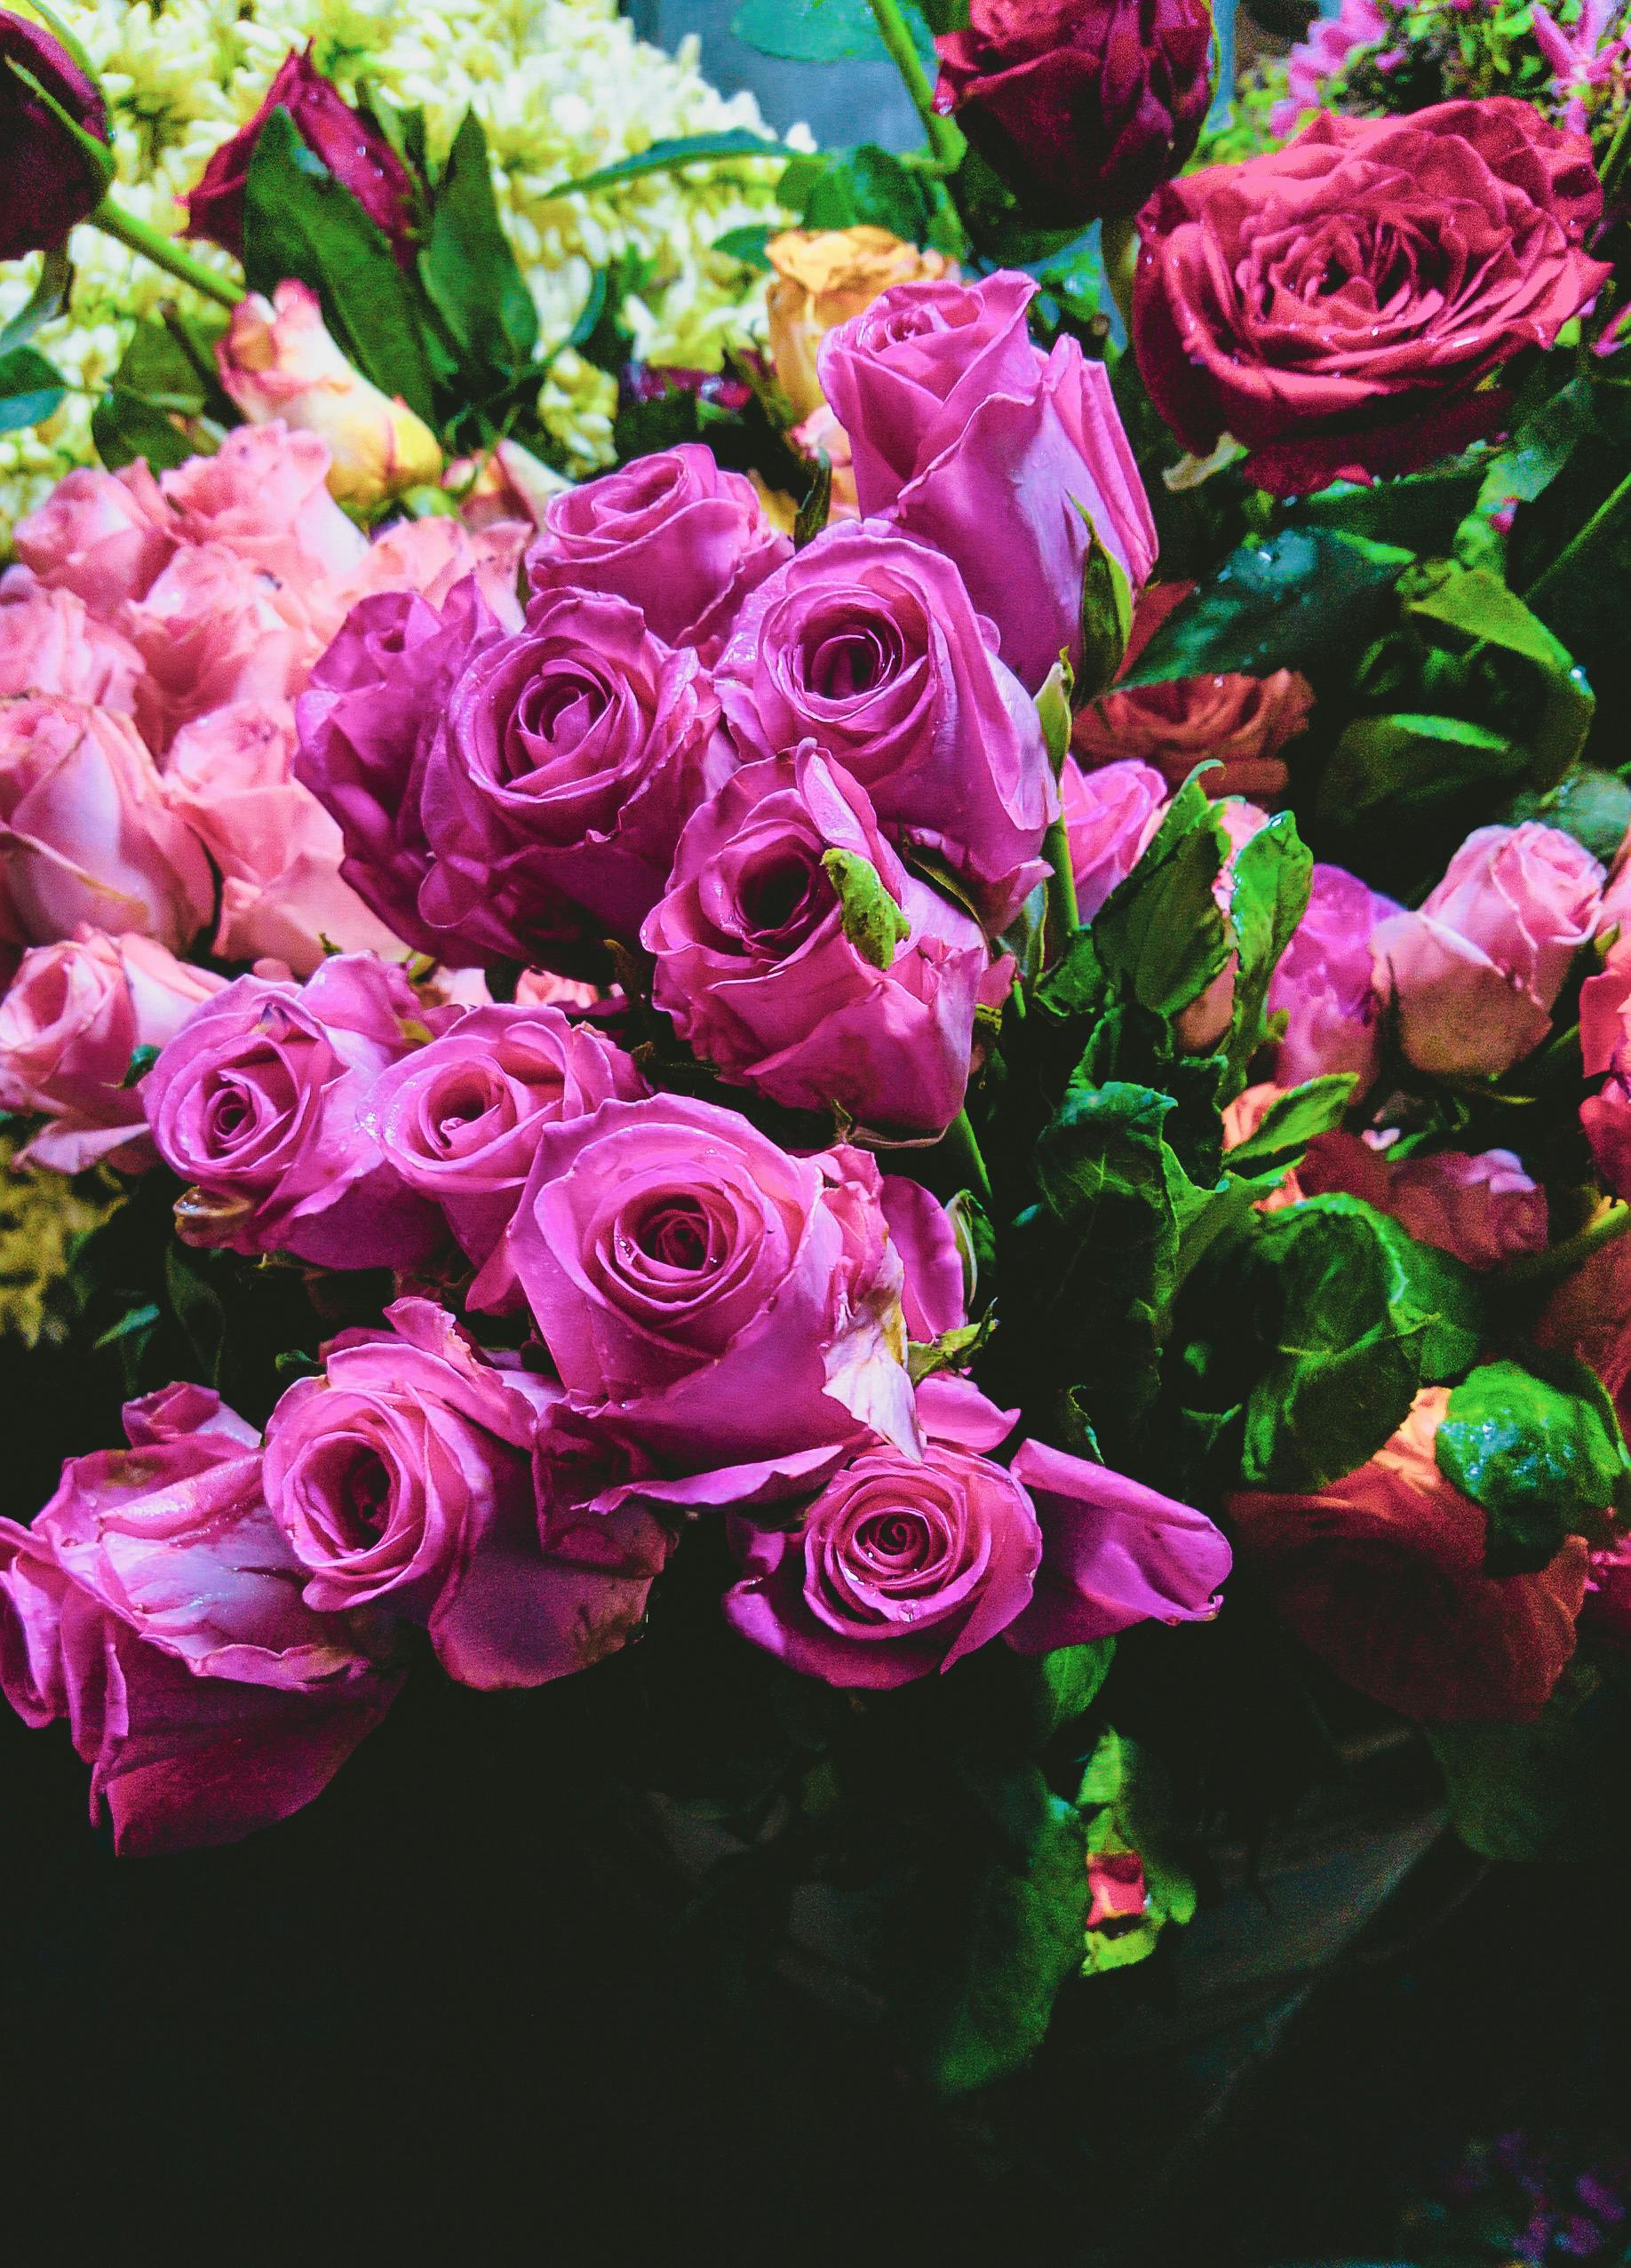 Free stock photo of beautiful flowers, bunch of flowers, pink roses